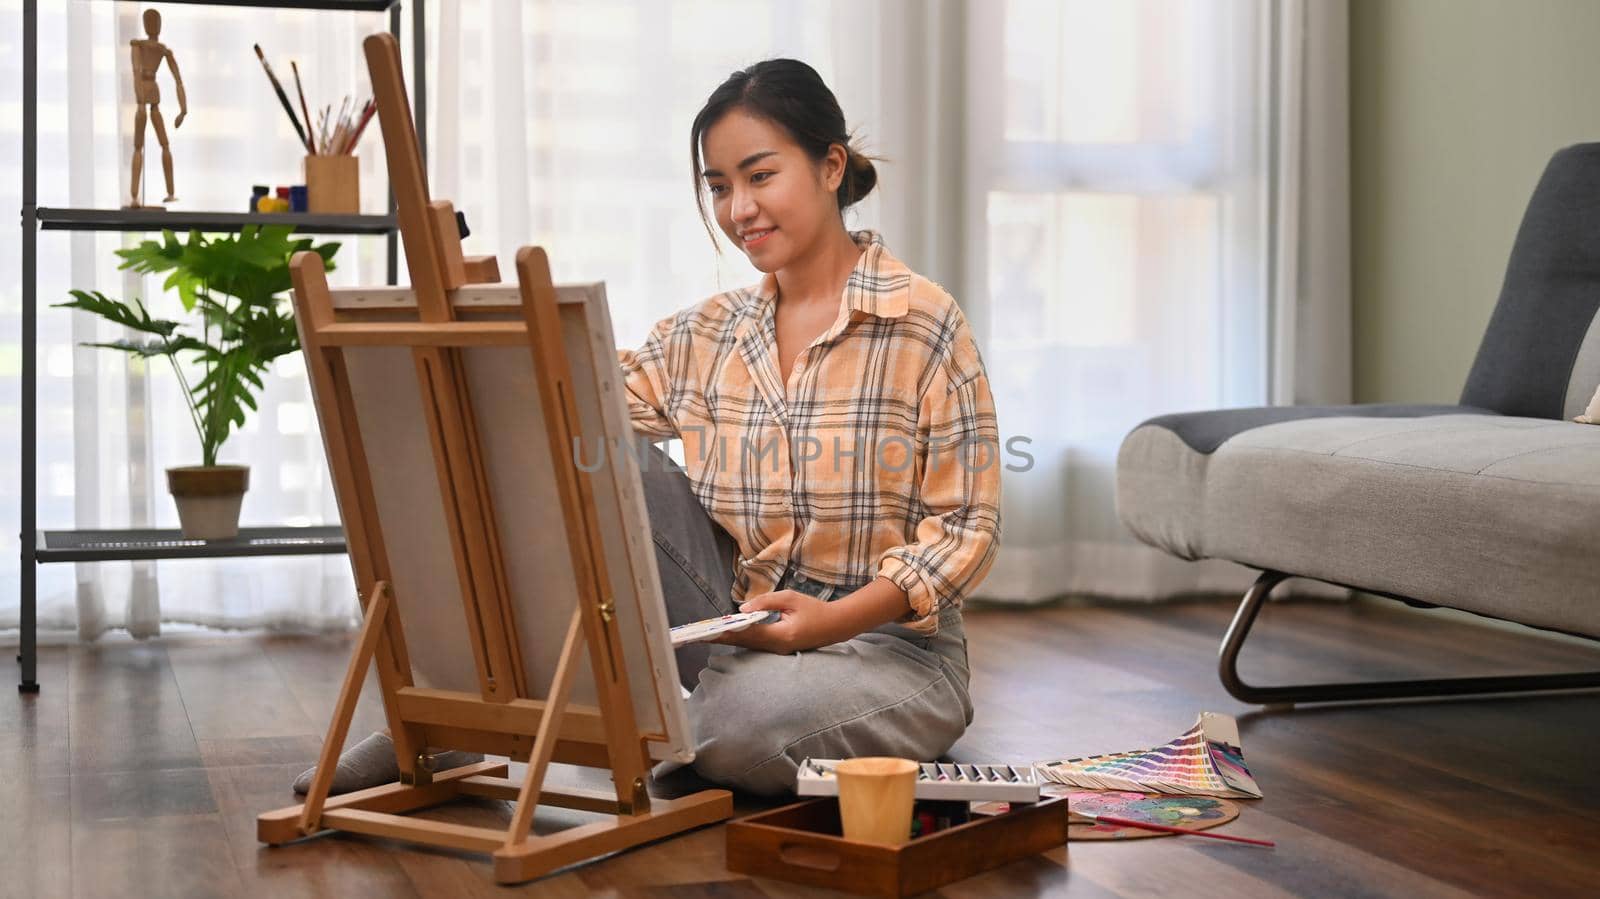 Pleasant female artist sitting on floor in bright living room and painting with watercolor on canvas. Art and leisure activity concept by prathanchorruangsak